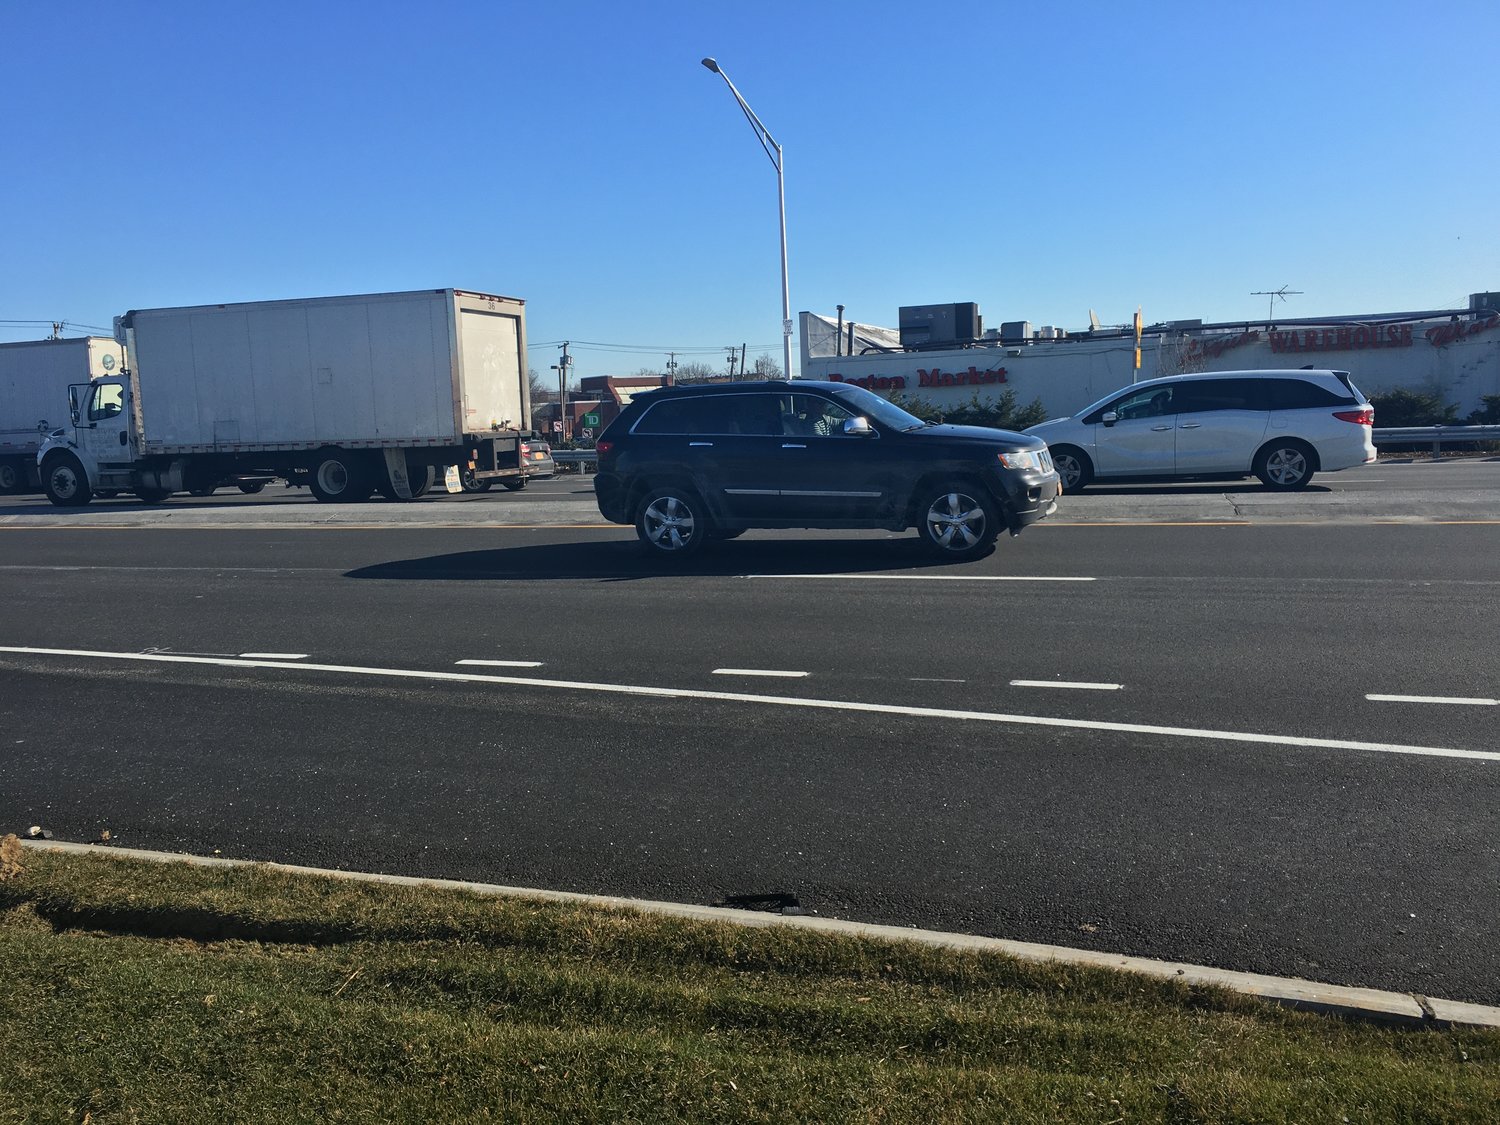 Traffic flow has vastly improved on the renovated portion of the Nassau Expressway, many commuters, business people and residents say.